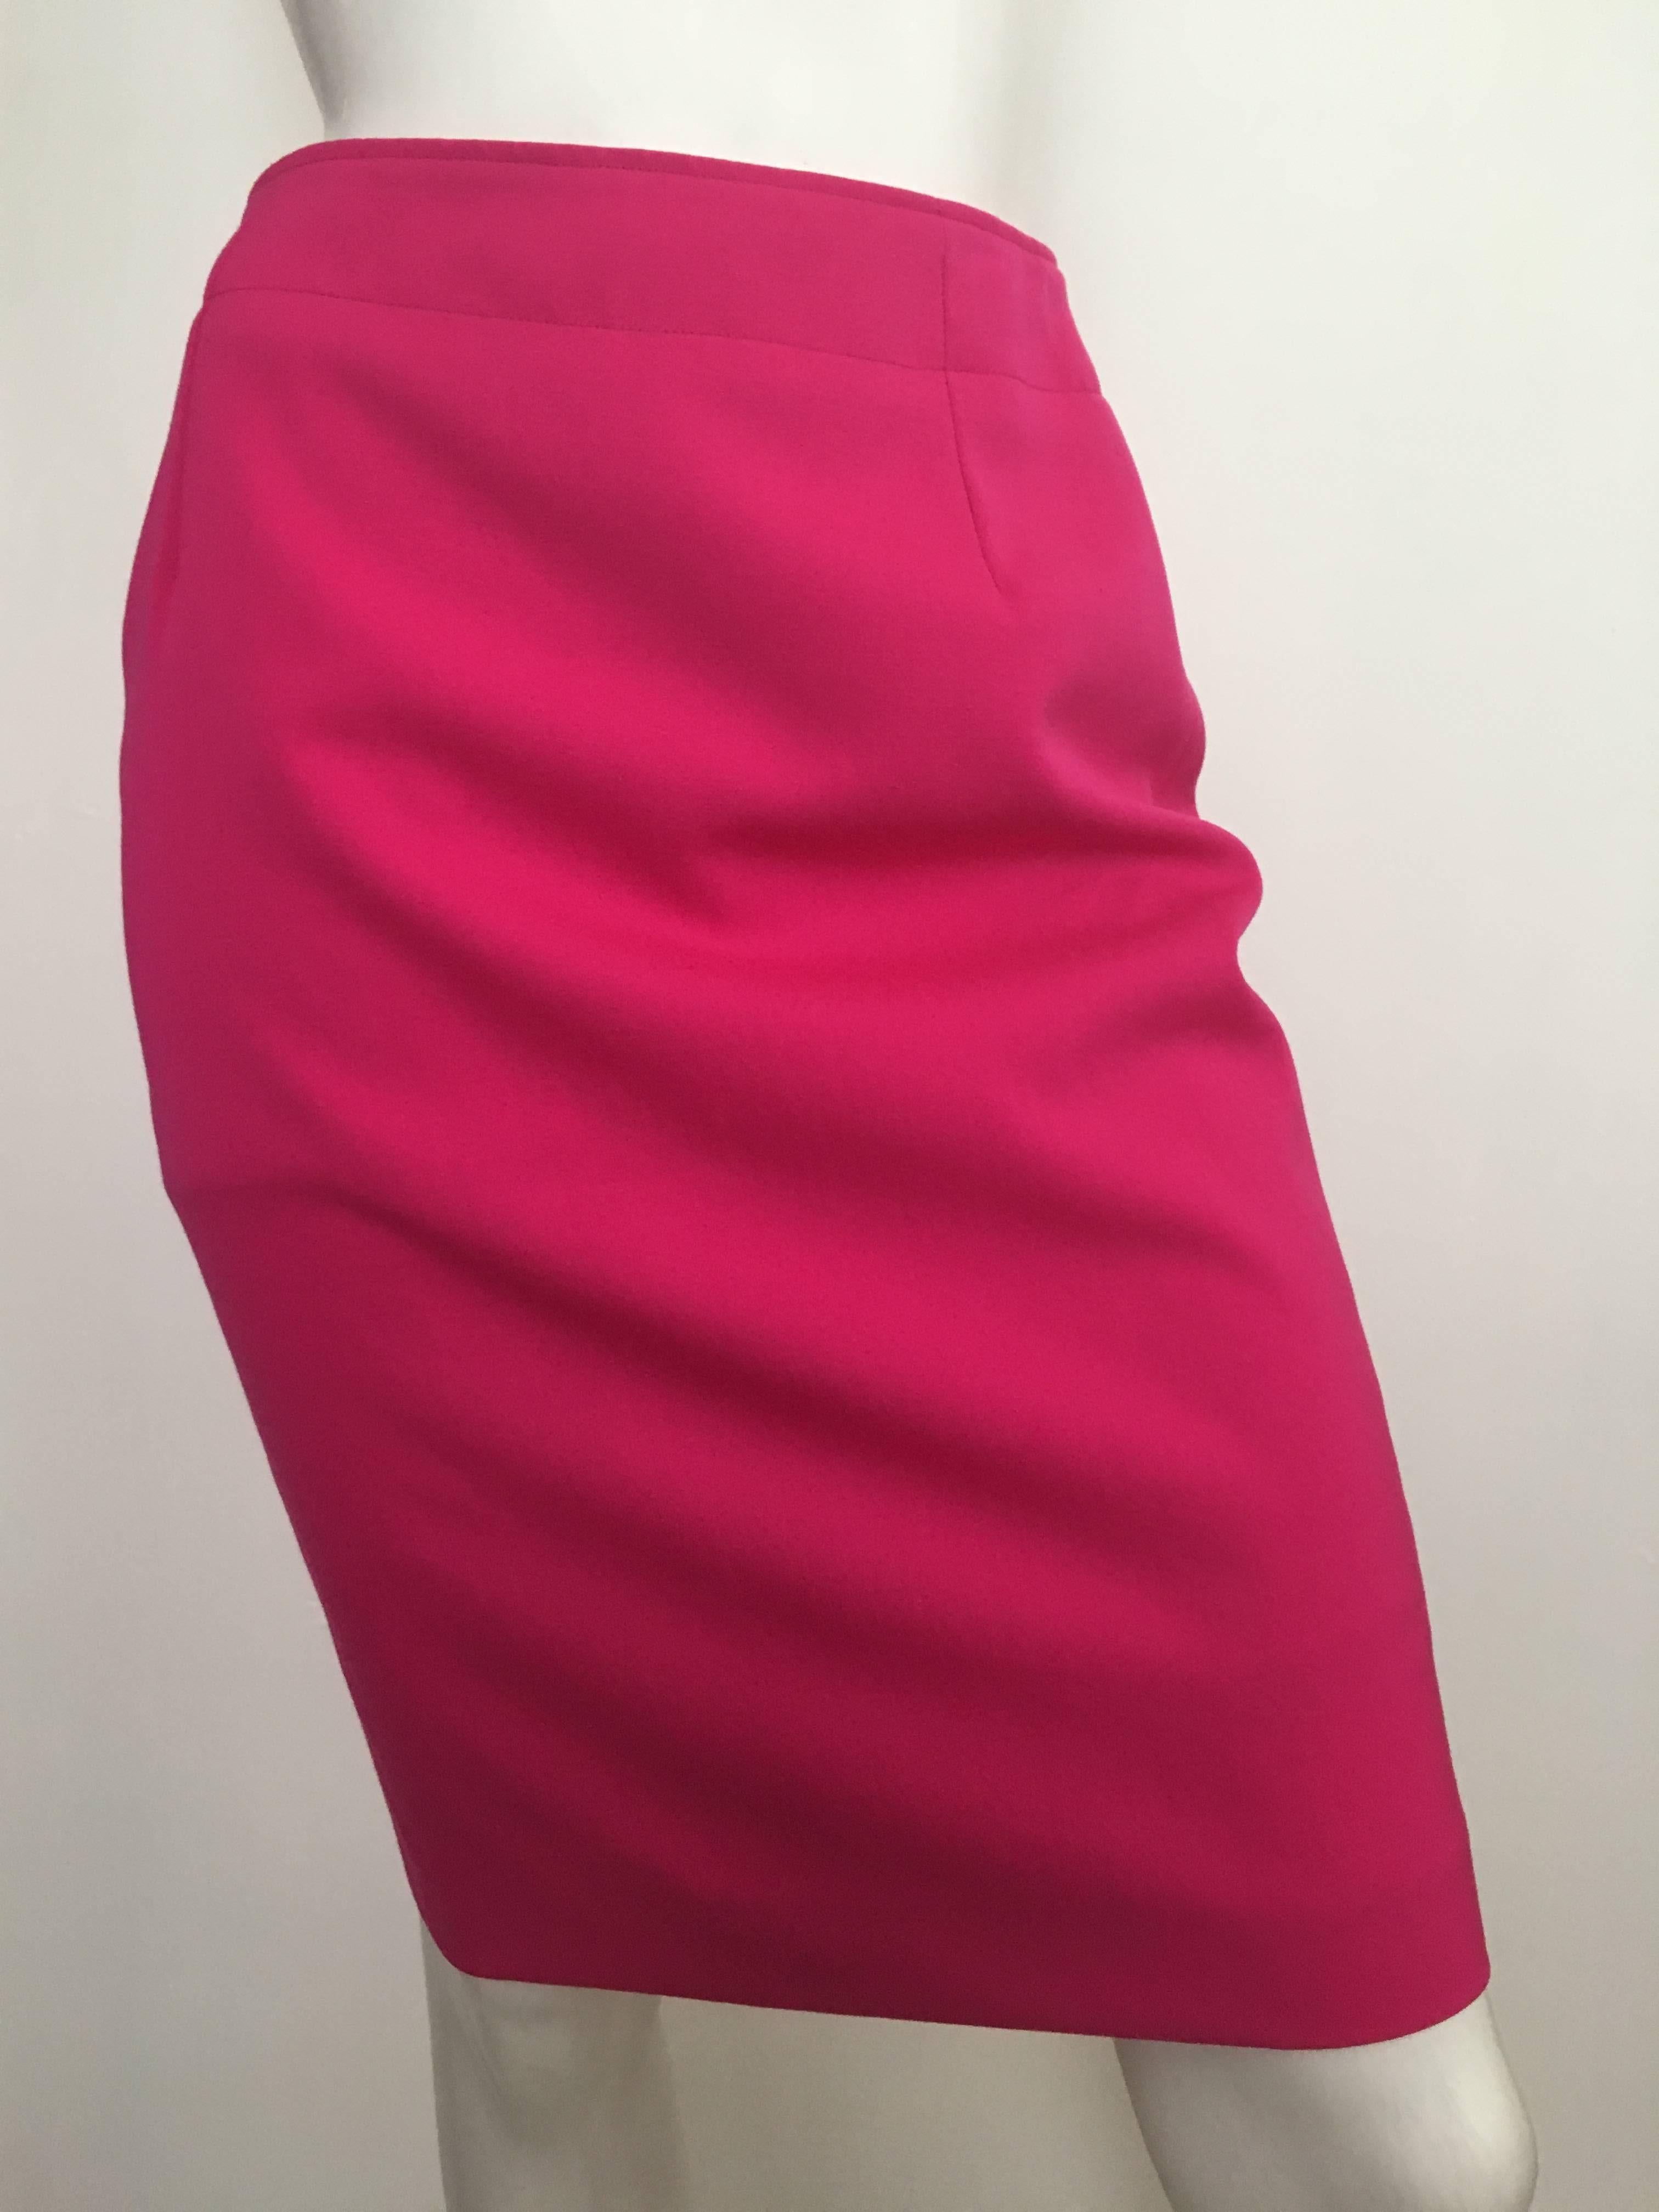 Lolita Lempicka Wool Pink Sexy Pencil Skirt Size 6. For Sale 2